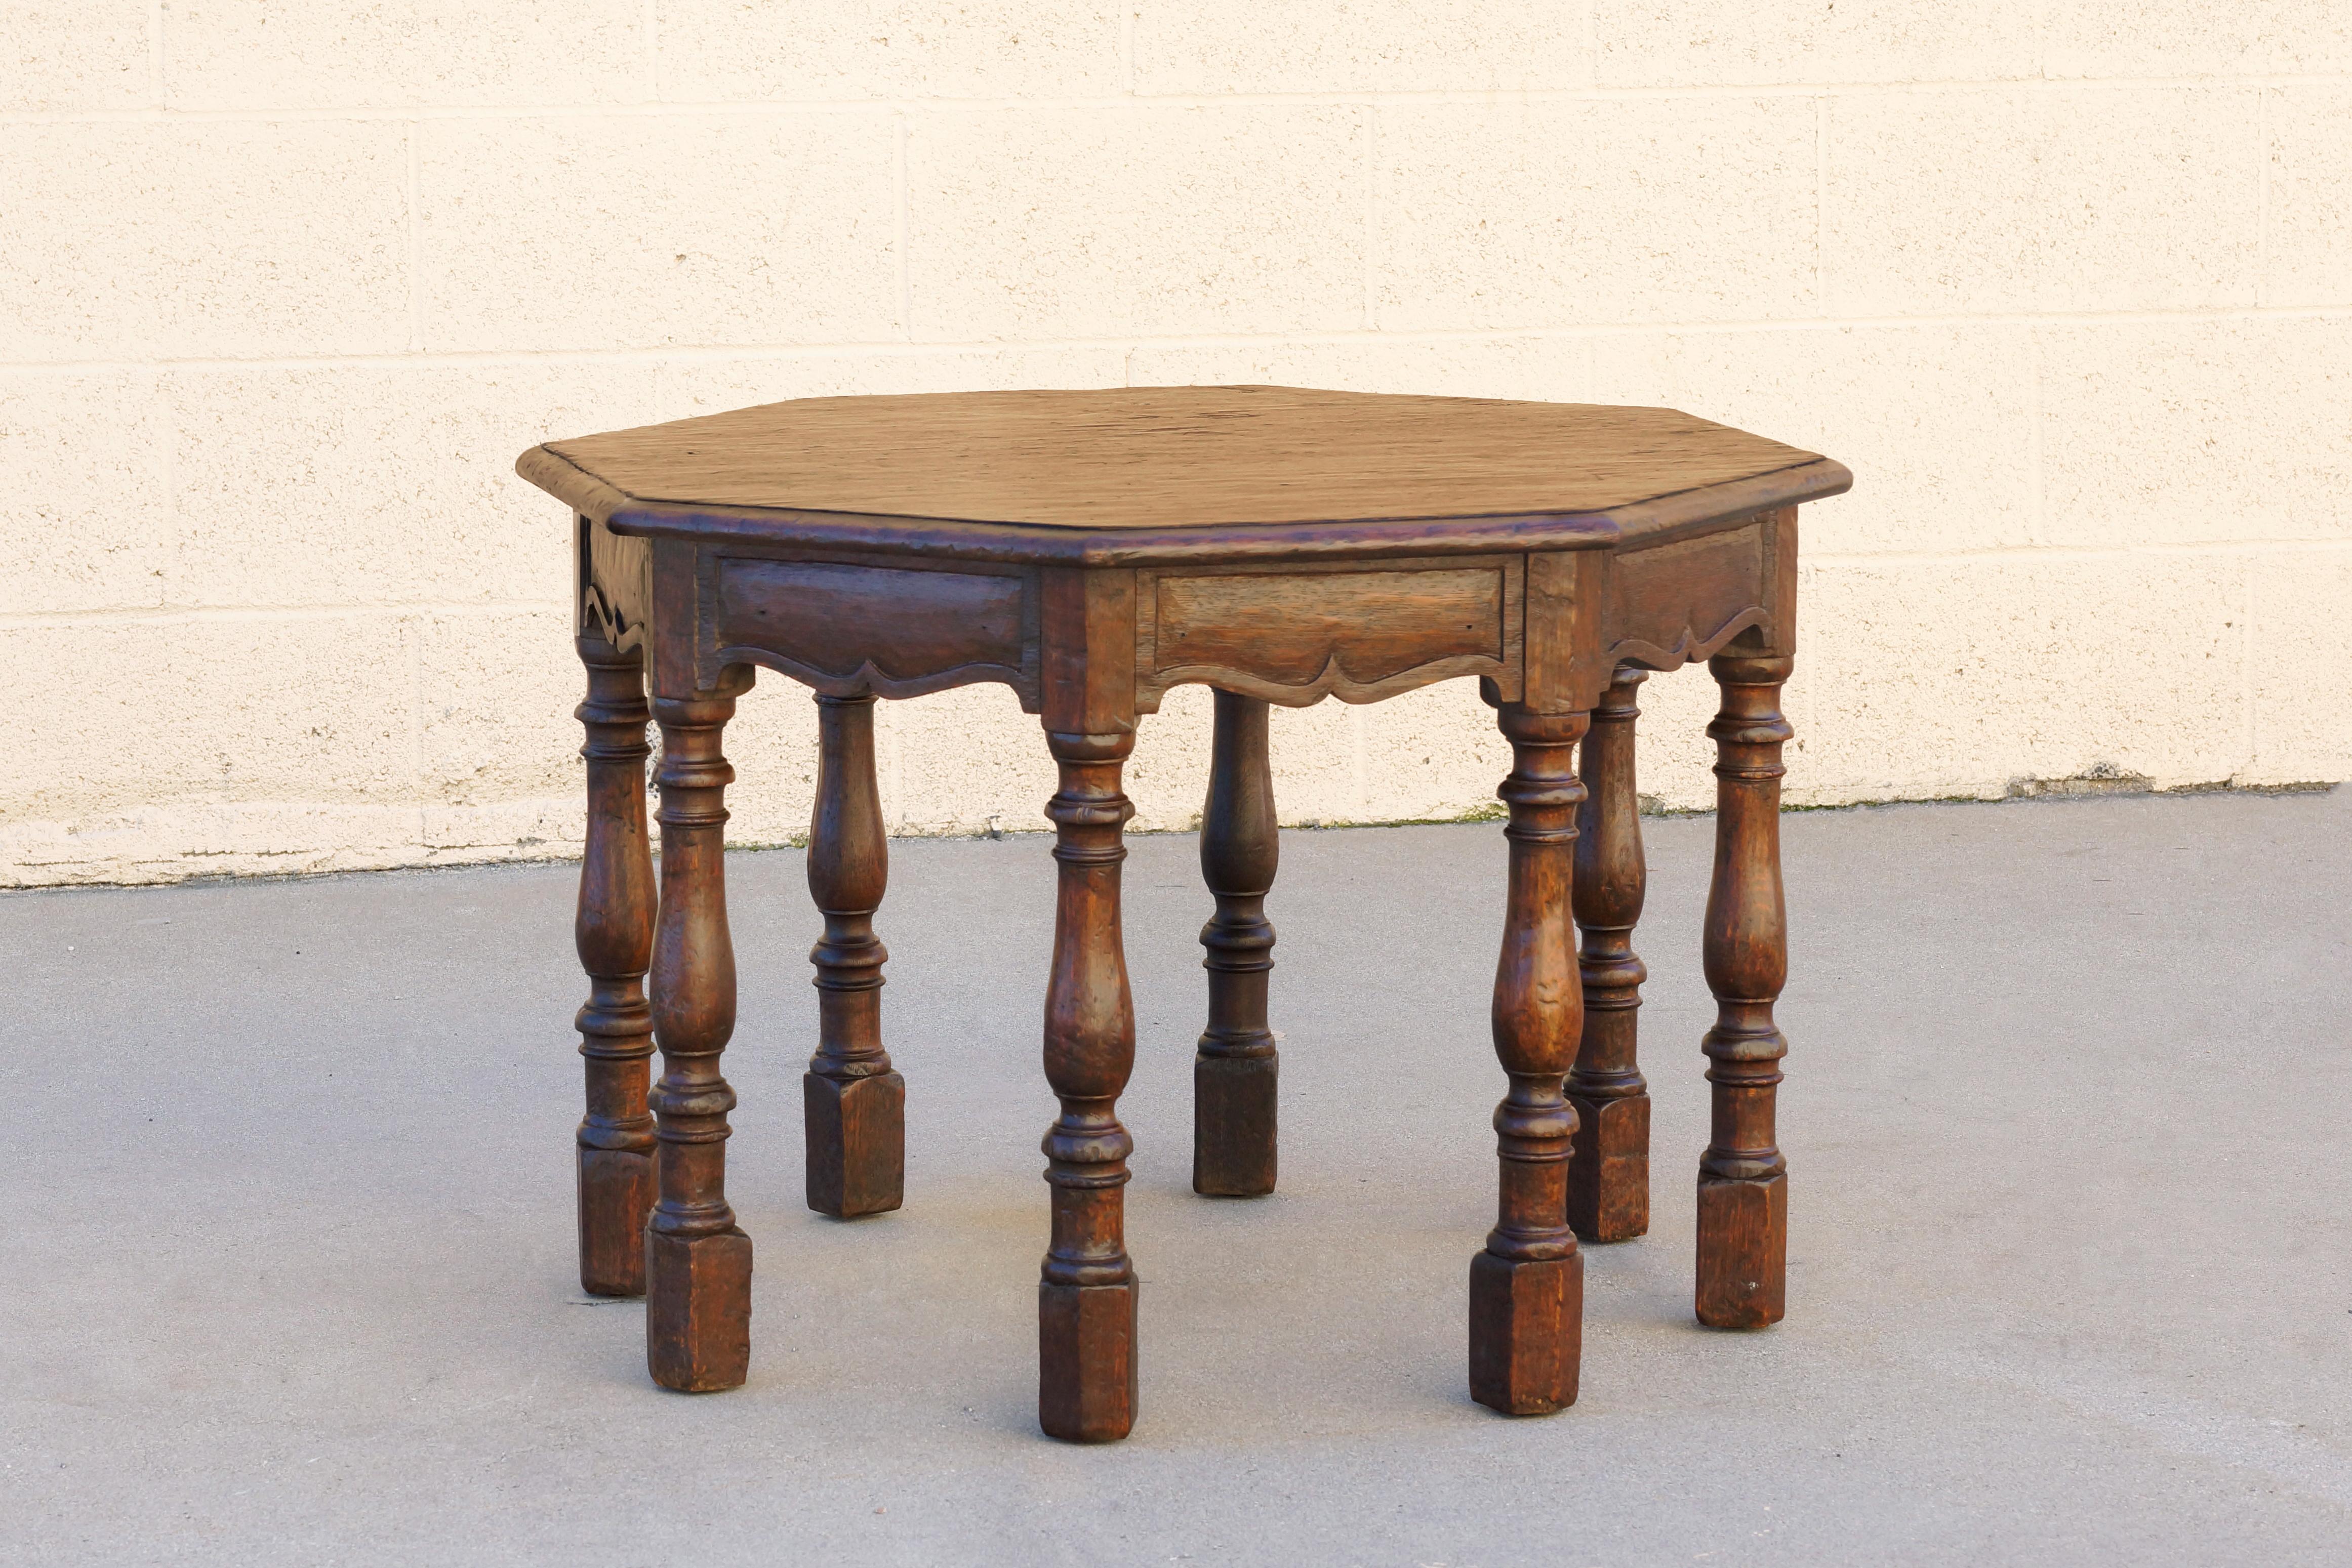 Wonderfully unique octagon shaped side table by Marshall Laird, Los Angeles, circa 1920s. Made from hand carved mahogany; Mission/ Spanish Revival style. Marshall Laird was known for the high quality custom furniture he provided to the elite of